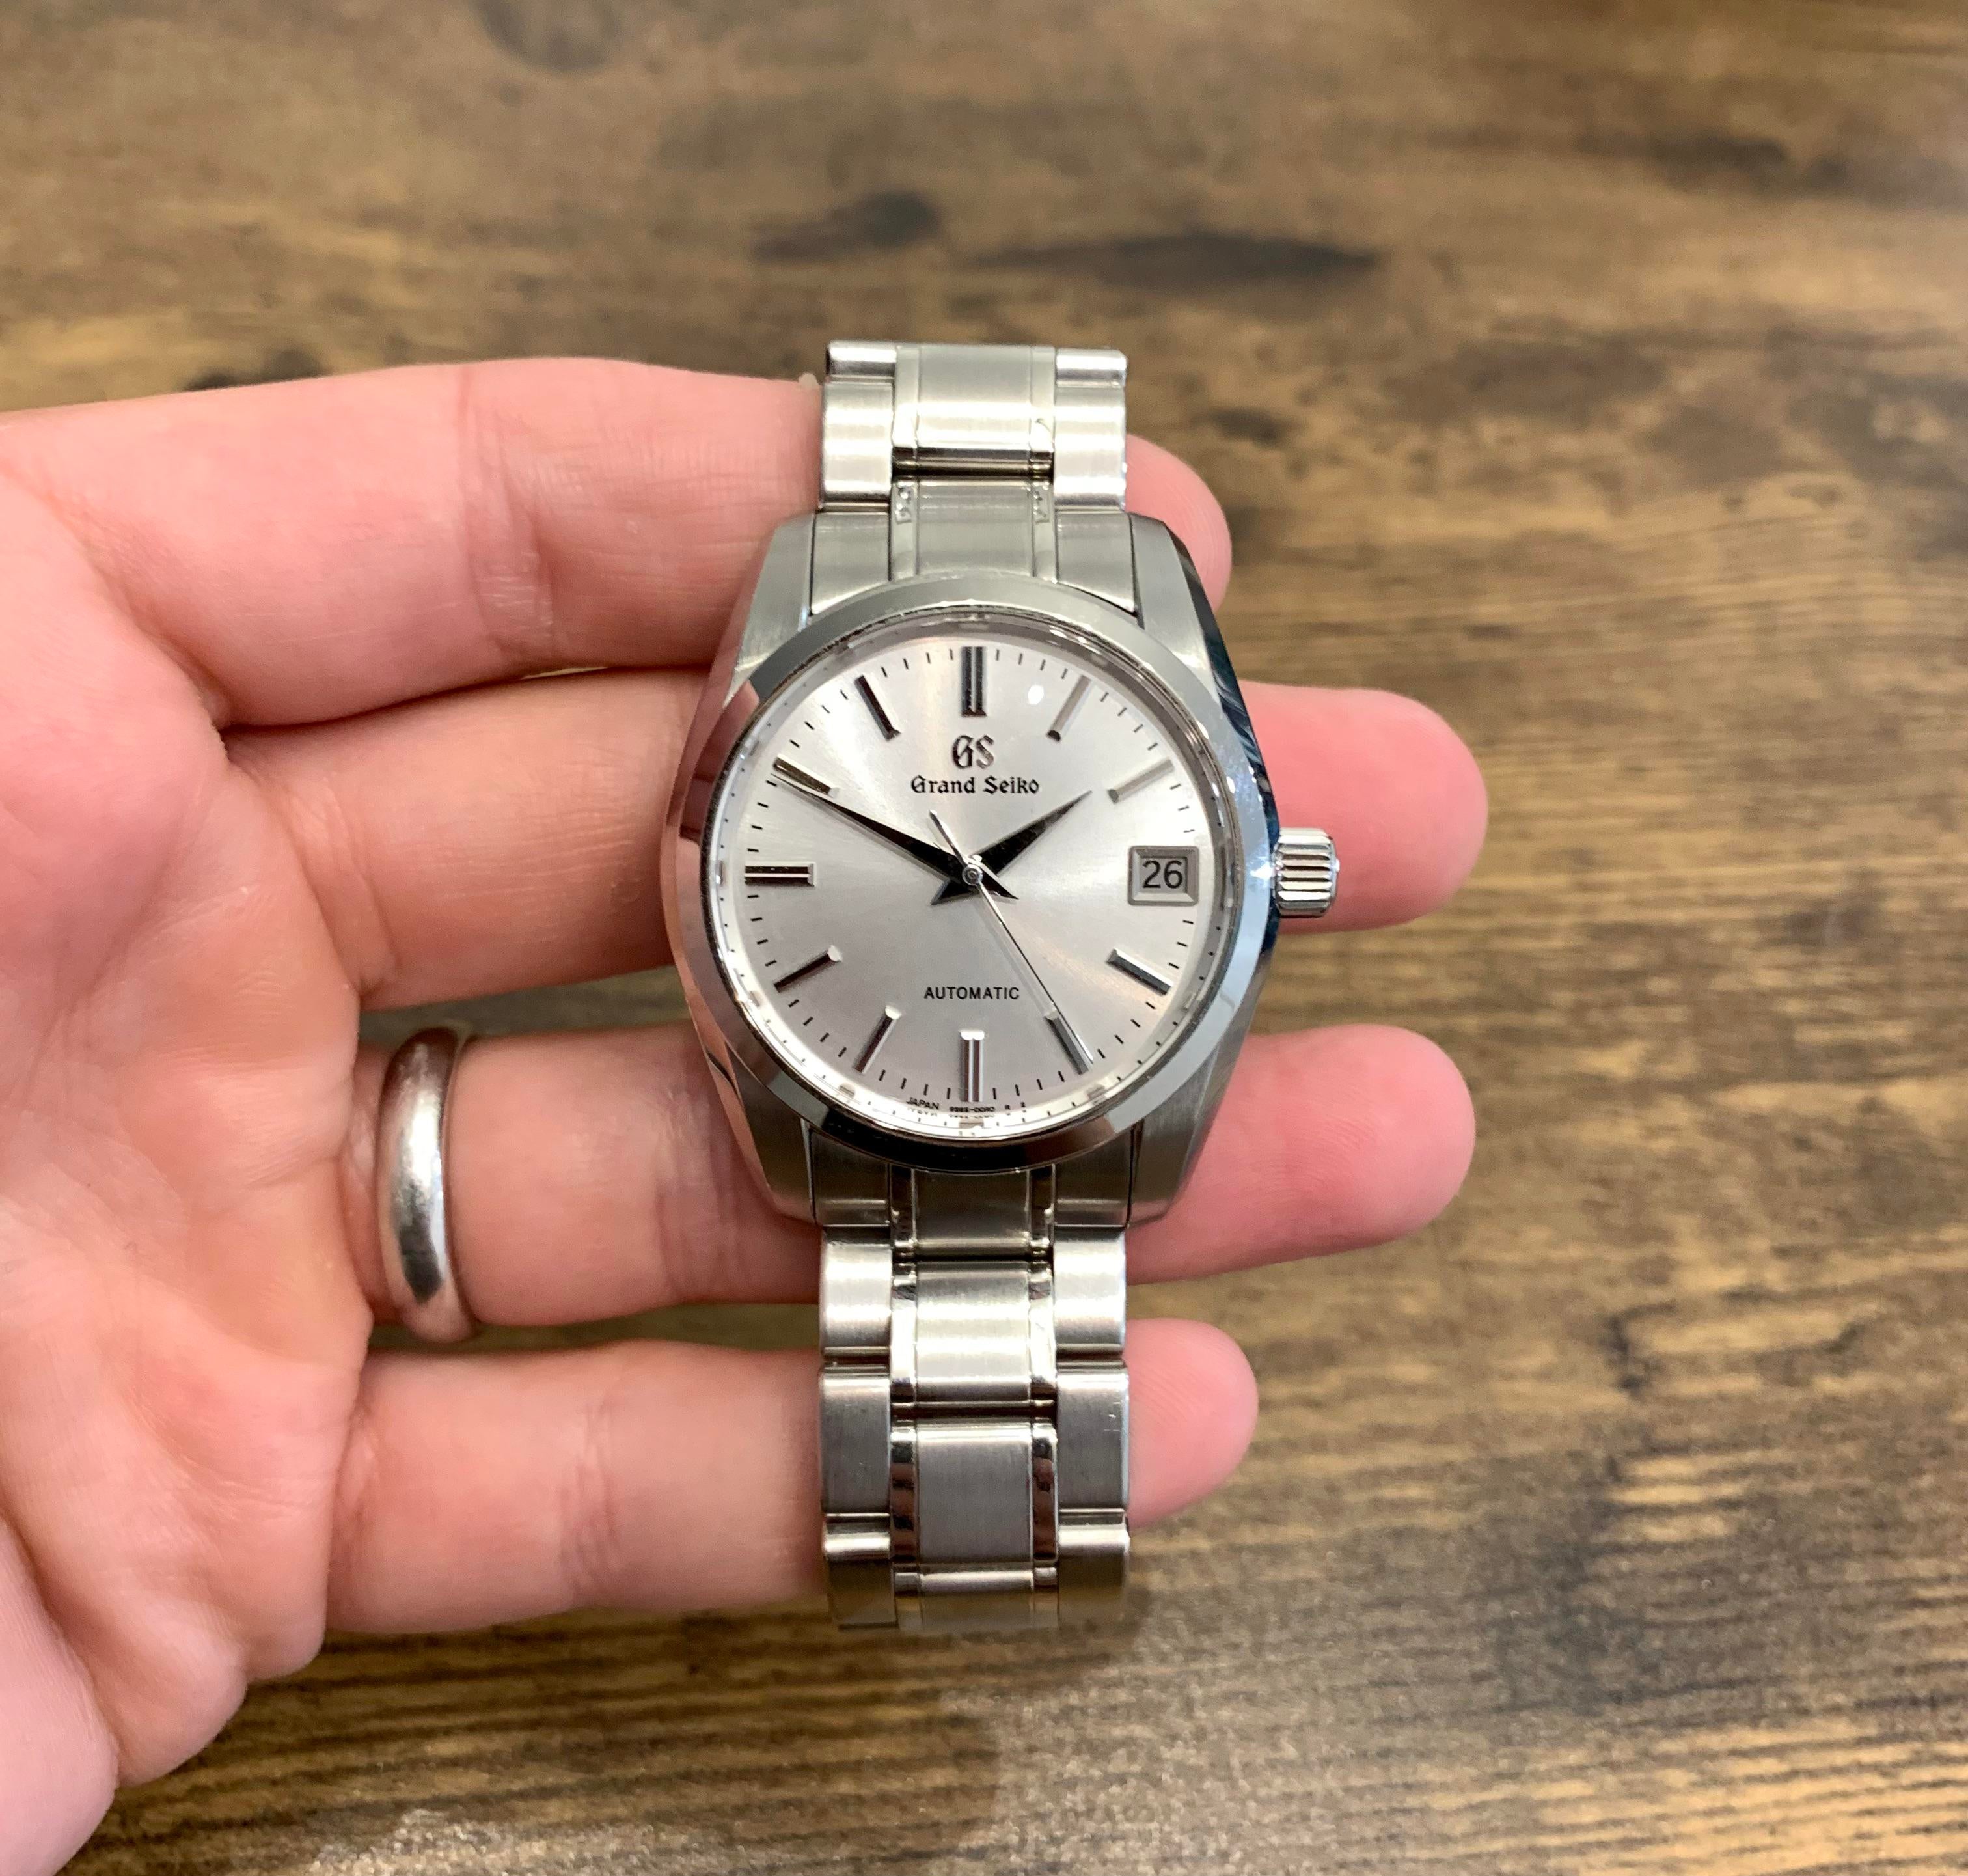 WTS] Grand Seiko SBGR251 with box and warranty card - $2650 | WatchCharts